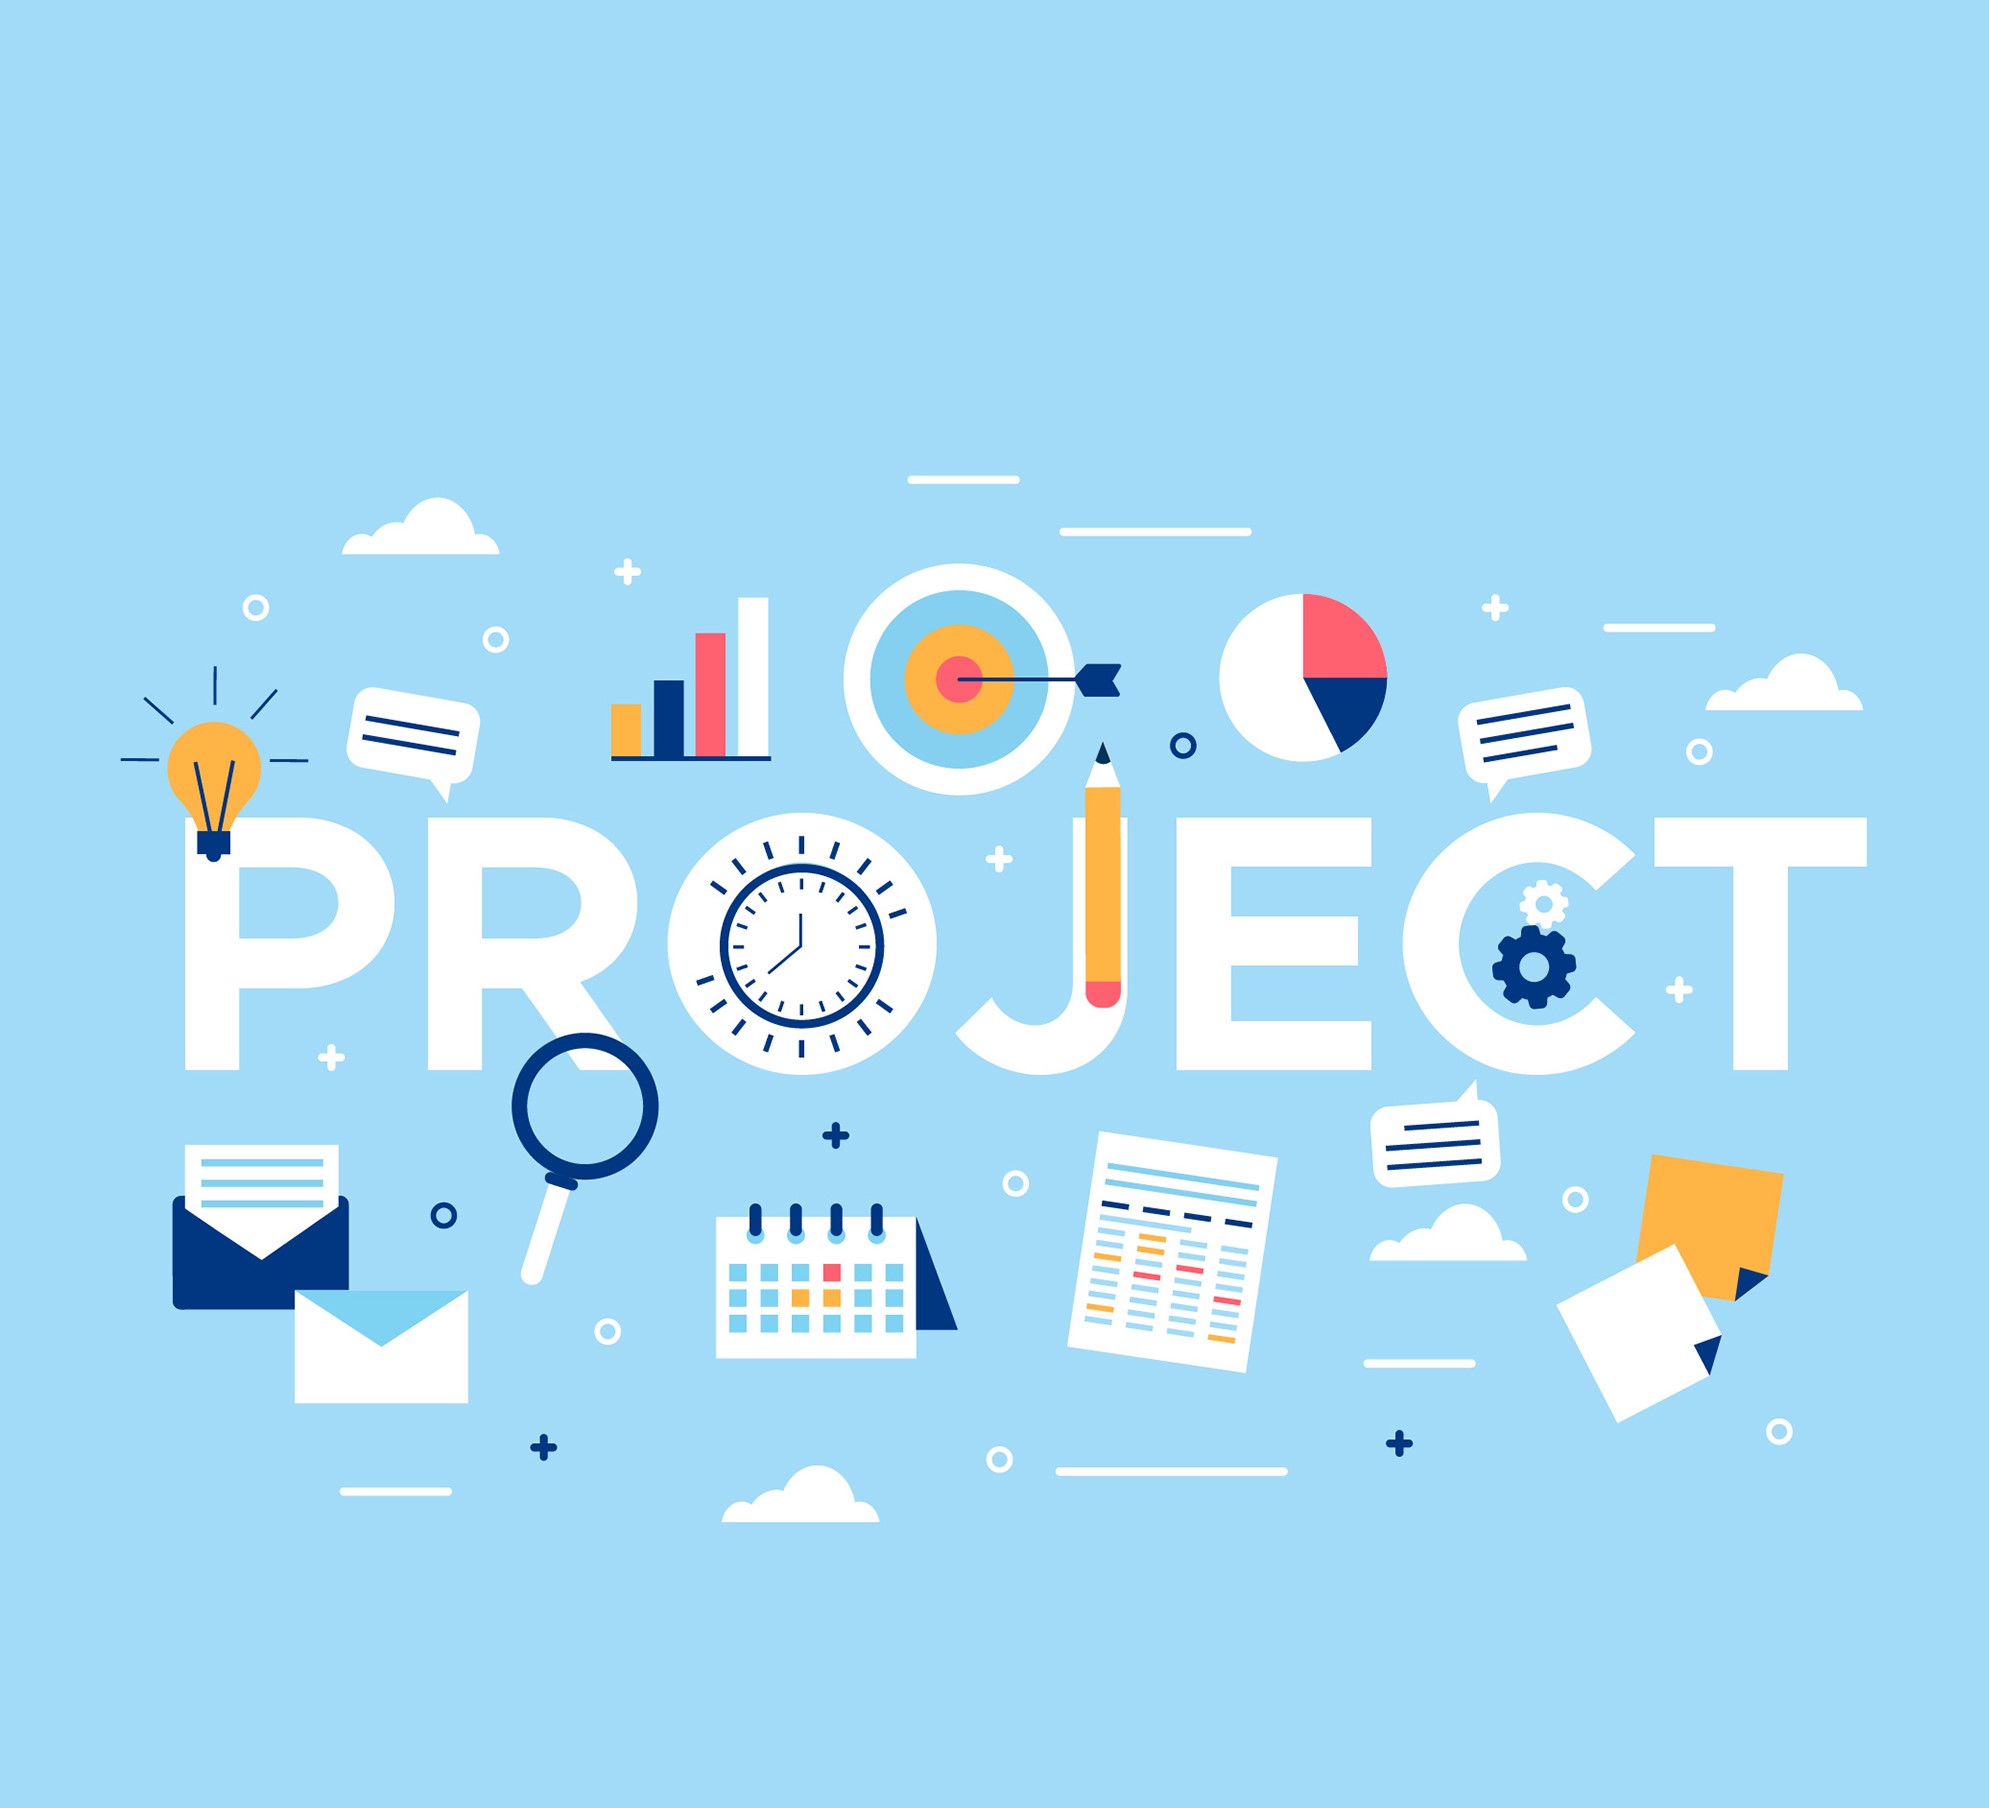 tiny icons of mails, calendar, press release, charts, goals, and messages depicting project management